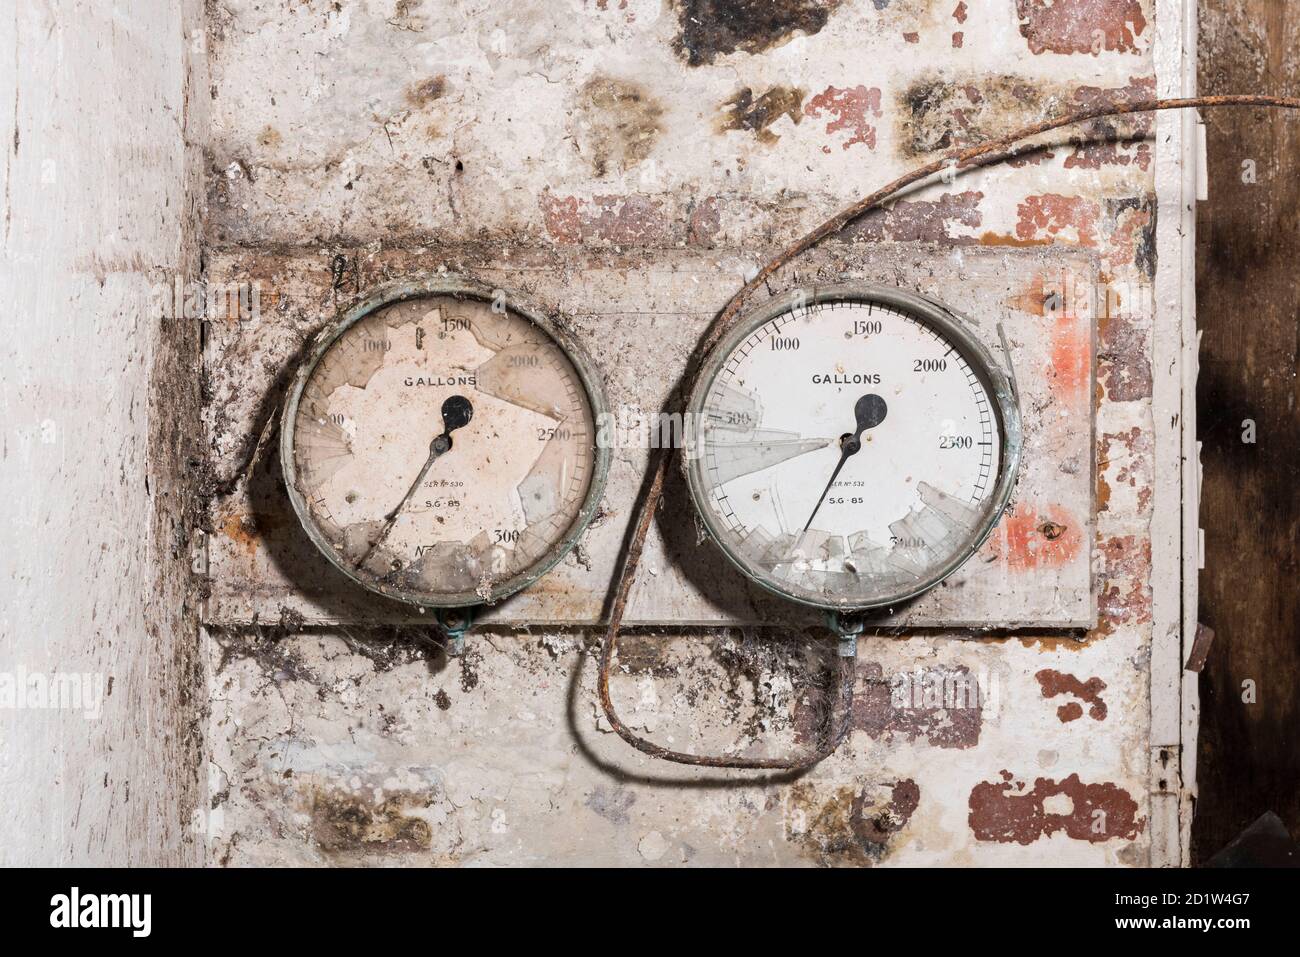 Close up of old and broken gauges on a brick wall. Stock Photo